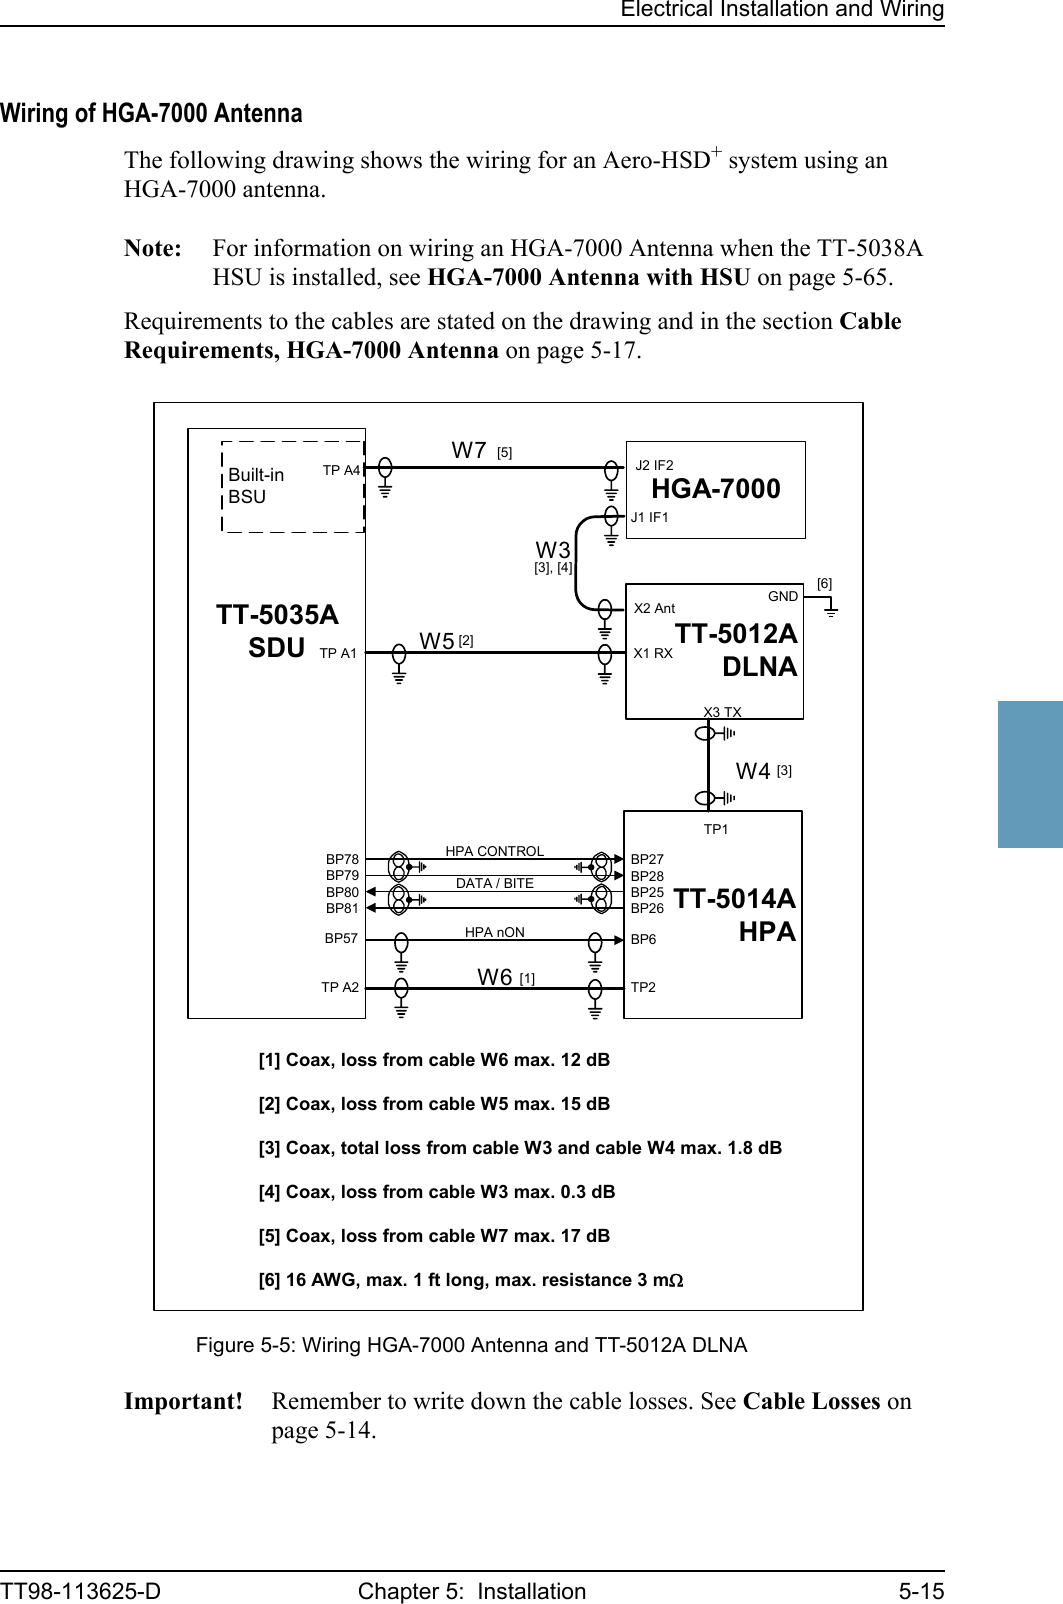 Electrical Installation and WiringTT98-113625-D Chapter 5:  Installation 5-155555Wiring of HGA-7000 AntennaThe following drawing shows the wiring for an Aero-HSD+ system using an HGA-7000 antenna.Note: For information on wiring an HGA-7000 Antenna when the TT-5038A HSU is installed, see HGA-7000 Antenna with HSU on page 5-65.Requirements to the cables are stated on the drawing and in the section Cable Requirements, HGA-7000 Antenna on page 5-17.Important! Remember to write down the cable losses. See Cable Losses on page 5-14.Figure 5-5: Wiring HGA-7000 Antenna and TT-5012A DLNATT-5035ASDUBP78BP79BP80BP81TP A2HPA nONBP57 BP6TP2BP27BP28BP25BP26TP A1TT-5014AHPA[1] Coax, loss from cable W6 max. 12 dB[2] Coax, loss from cable W5 max. 15 dB[3] Coax, total loss from cable W3 and cable W4 max. 1.8 dB[4] Coax, loss from cable W3 max. 0.3 dB[5] Coax, loss from cable W7 max. 17 dB[6] 16 AWG, max. 1 ft long, max. resistance 3 mΩHPA CONTROLDATA / BITETP1TT-5012ADLNAX3 TXX1 RXX2 AntHGA-7000TP A4[3], [4]W5W3W6J2 IF2J1 IF1Built-inBSUW7[2][5][1]GND[6]W4[3]